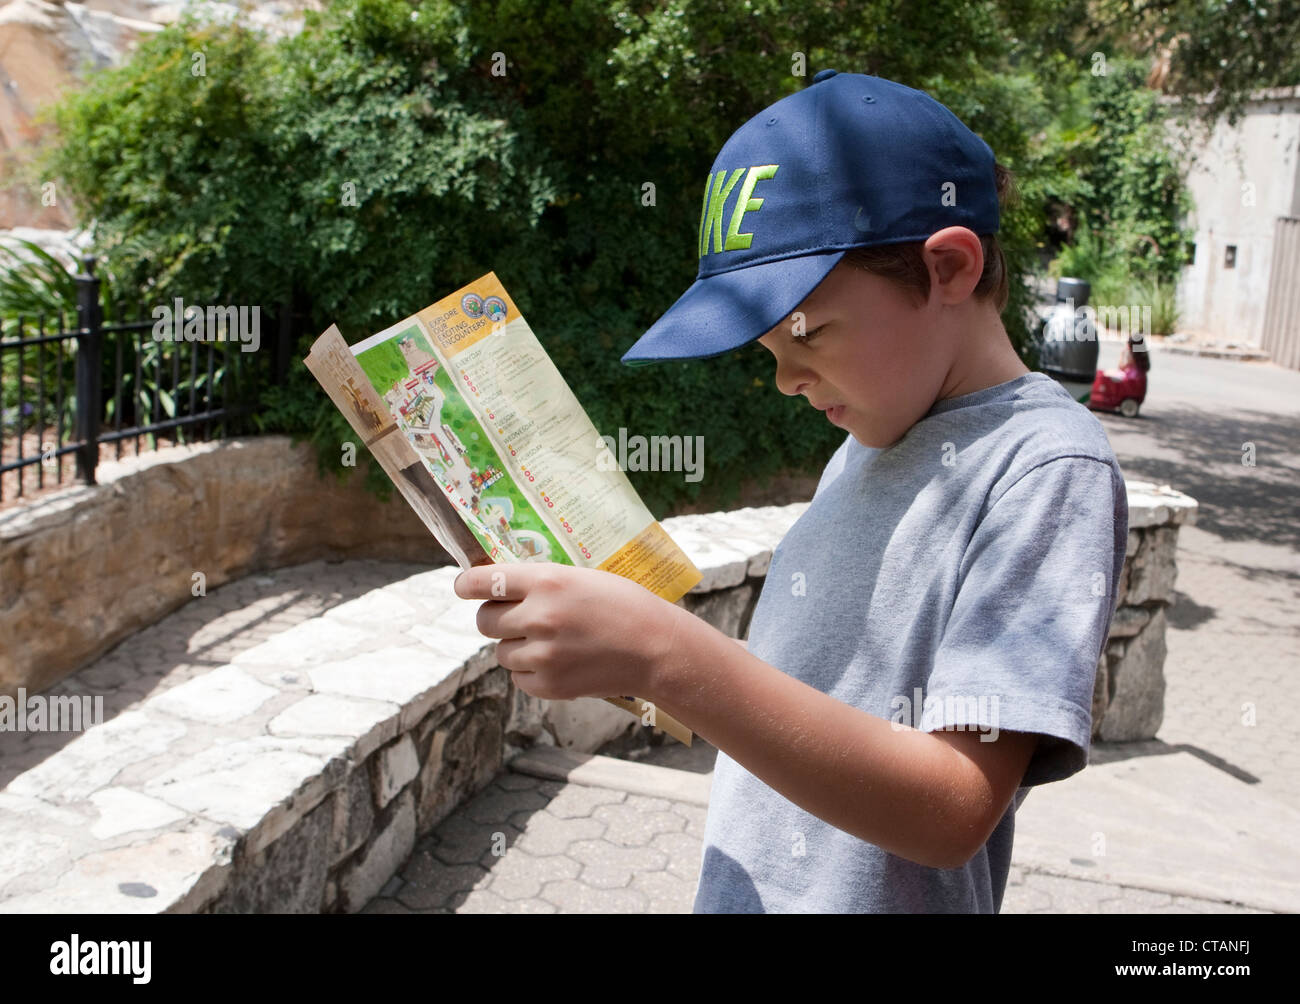 7 year old Mexican-American boy reads brochure and looks at map of San Antonio Zoo in Texas. Stock Photo